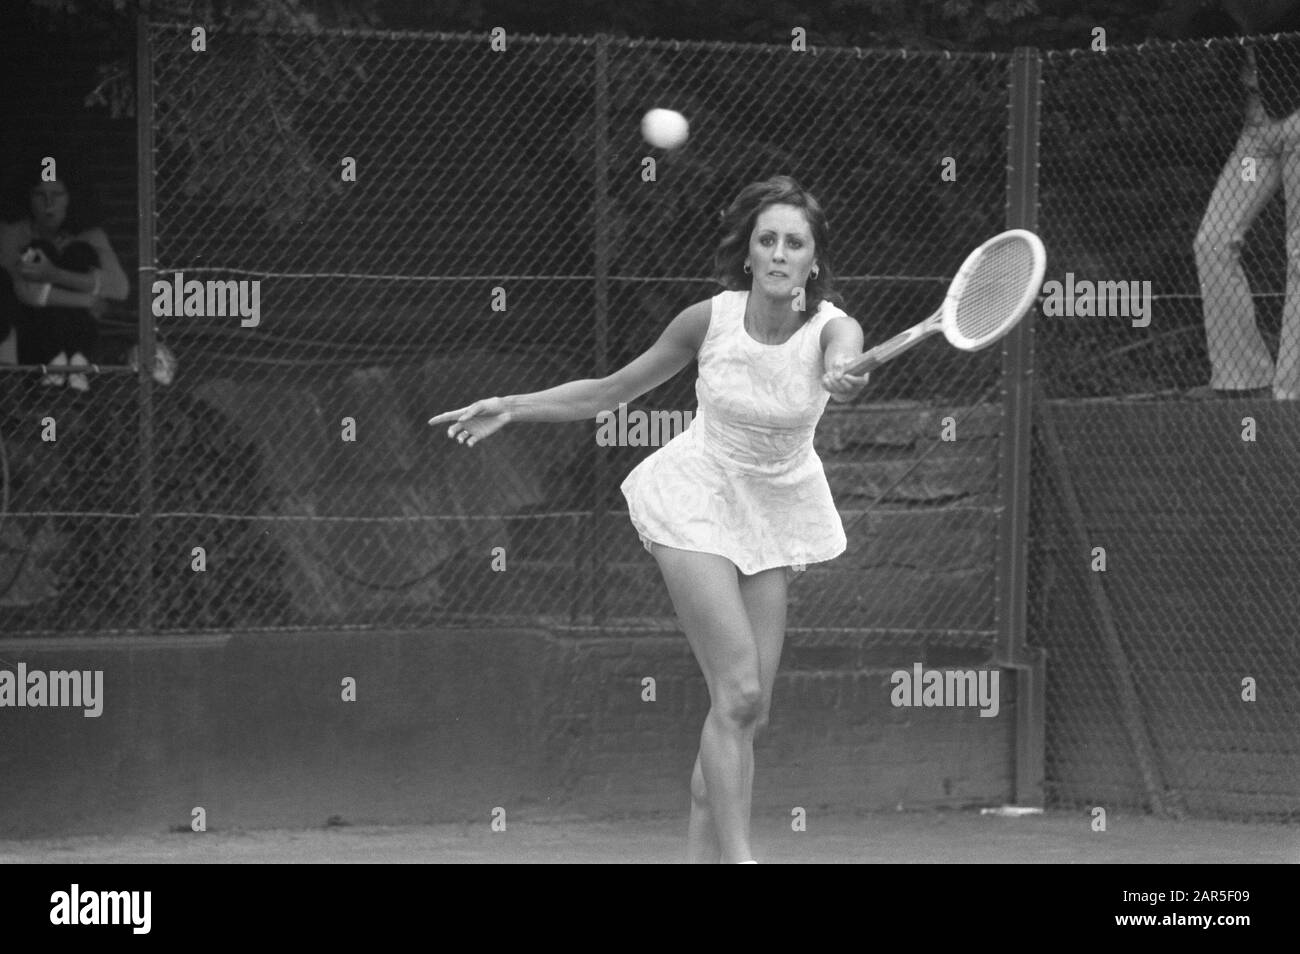 International Tennis Championships Milkhouse at Hilversum, Judith Salome in action Date: July 26, 1972 Location: Hilversum Keywords: Championships, Tennis Personname: Judith Salome Institution name: Melkhuisje,'t Stock Photo